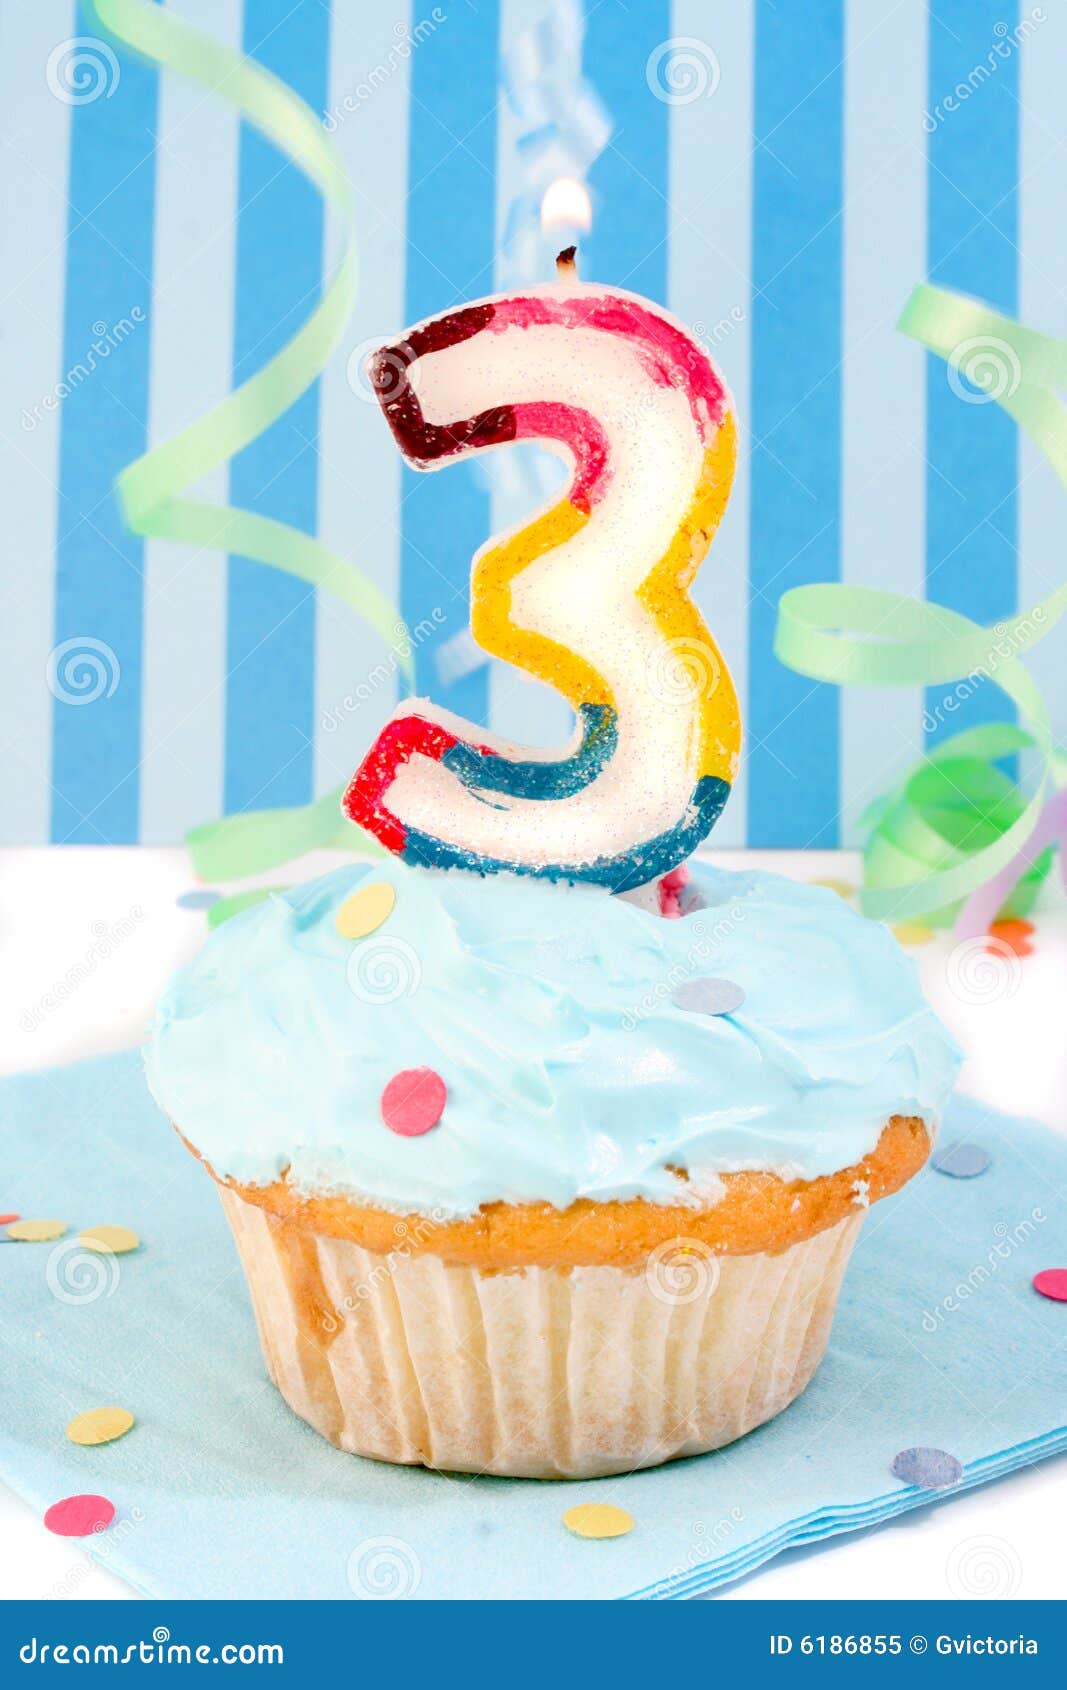 Boy s third birthday stock image. Image of delicious, decorations - 6186855